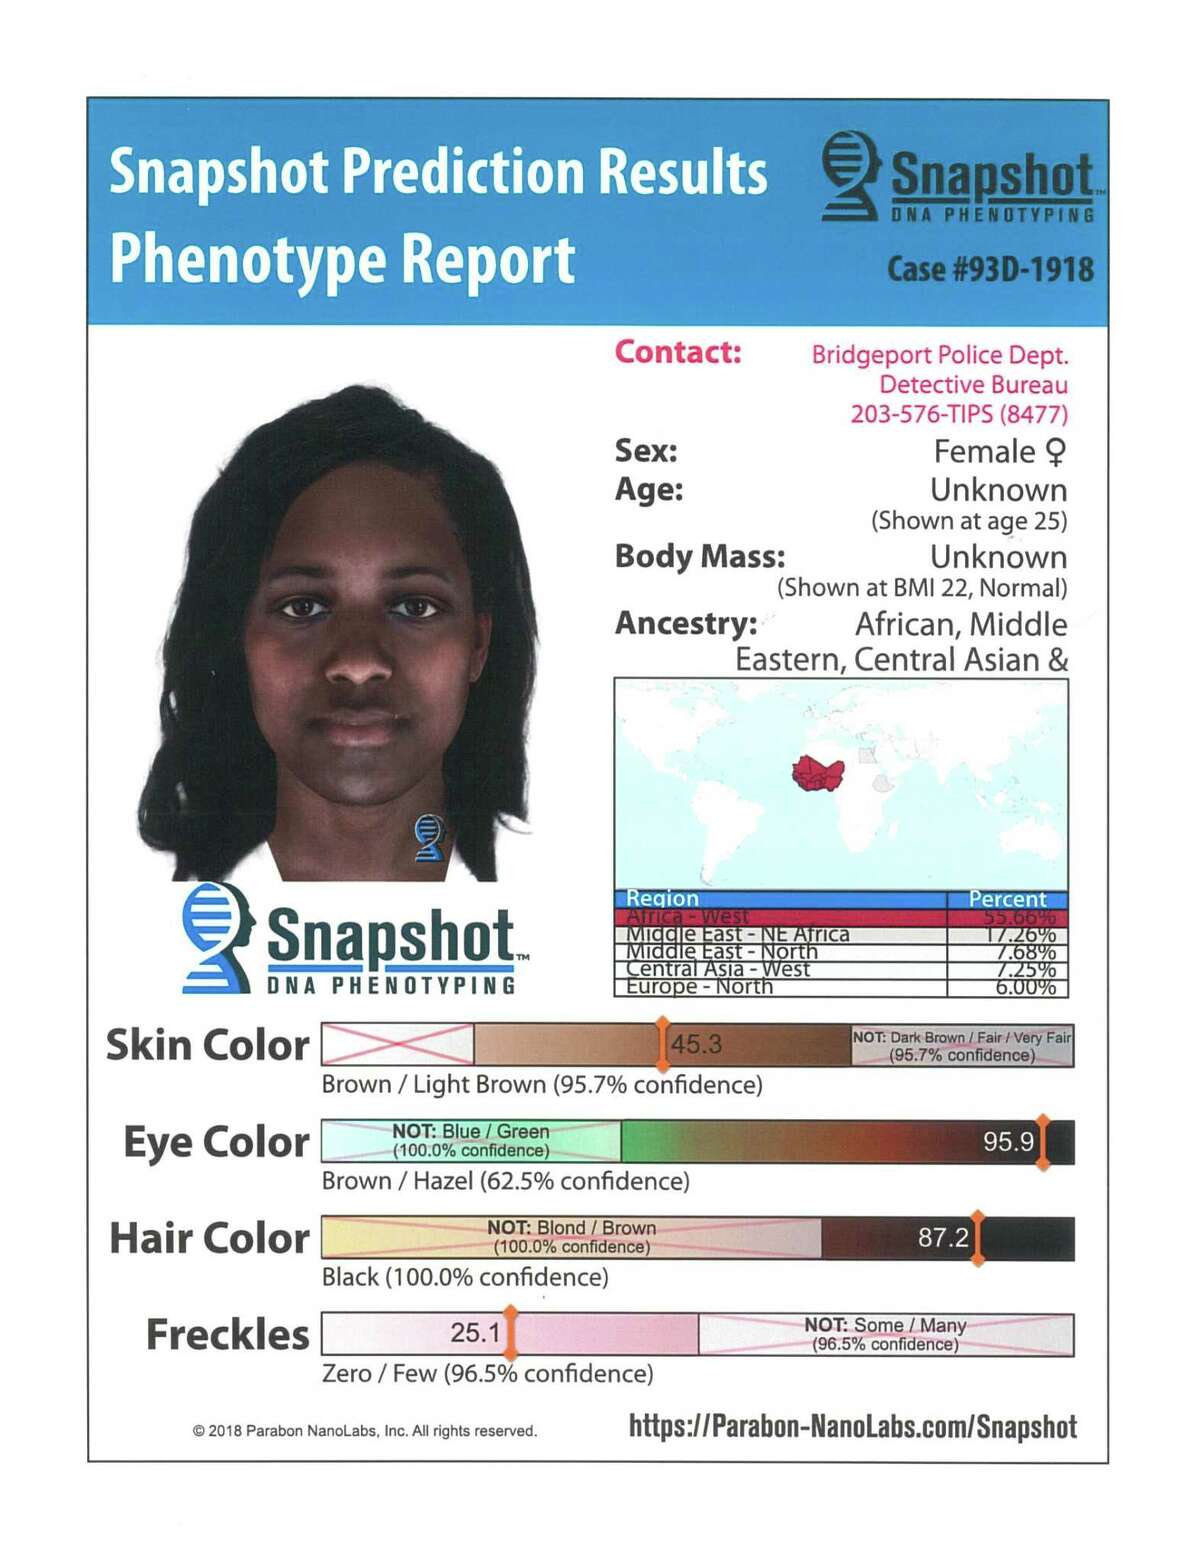 The Bridgeport Police Department released new composite images of an unidentified woman who was murdered and burned beyond recognition in 1993.The images of the victim were created using new DNA technology, and police hope they will help establish the identity of the woman, whose murder has never been solved.